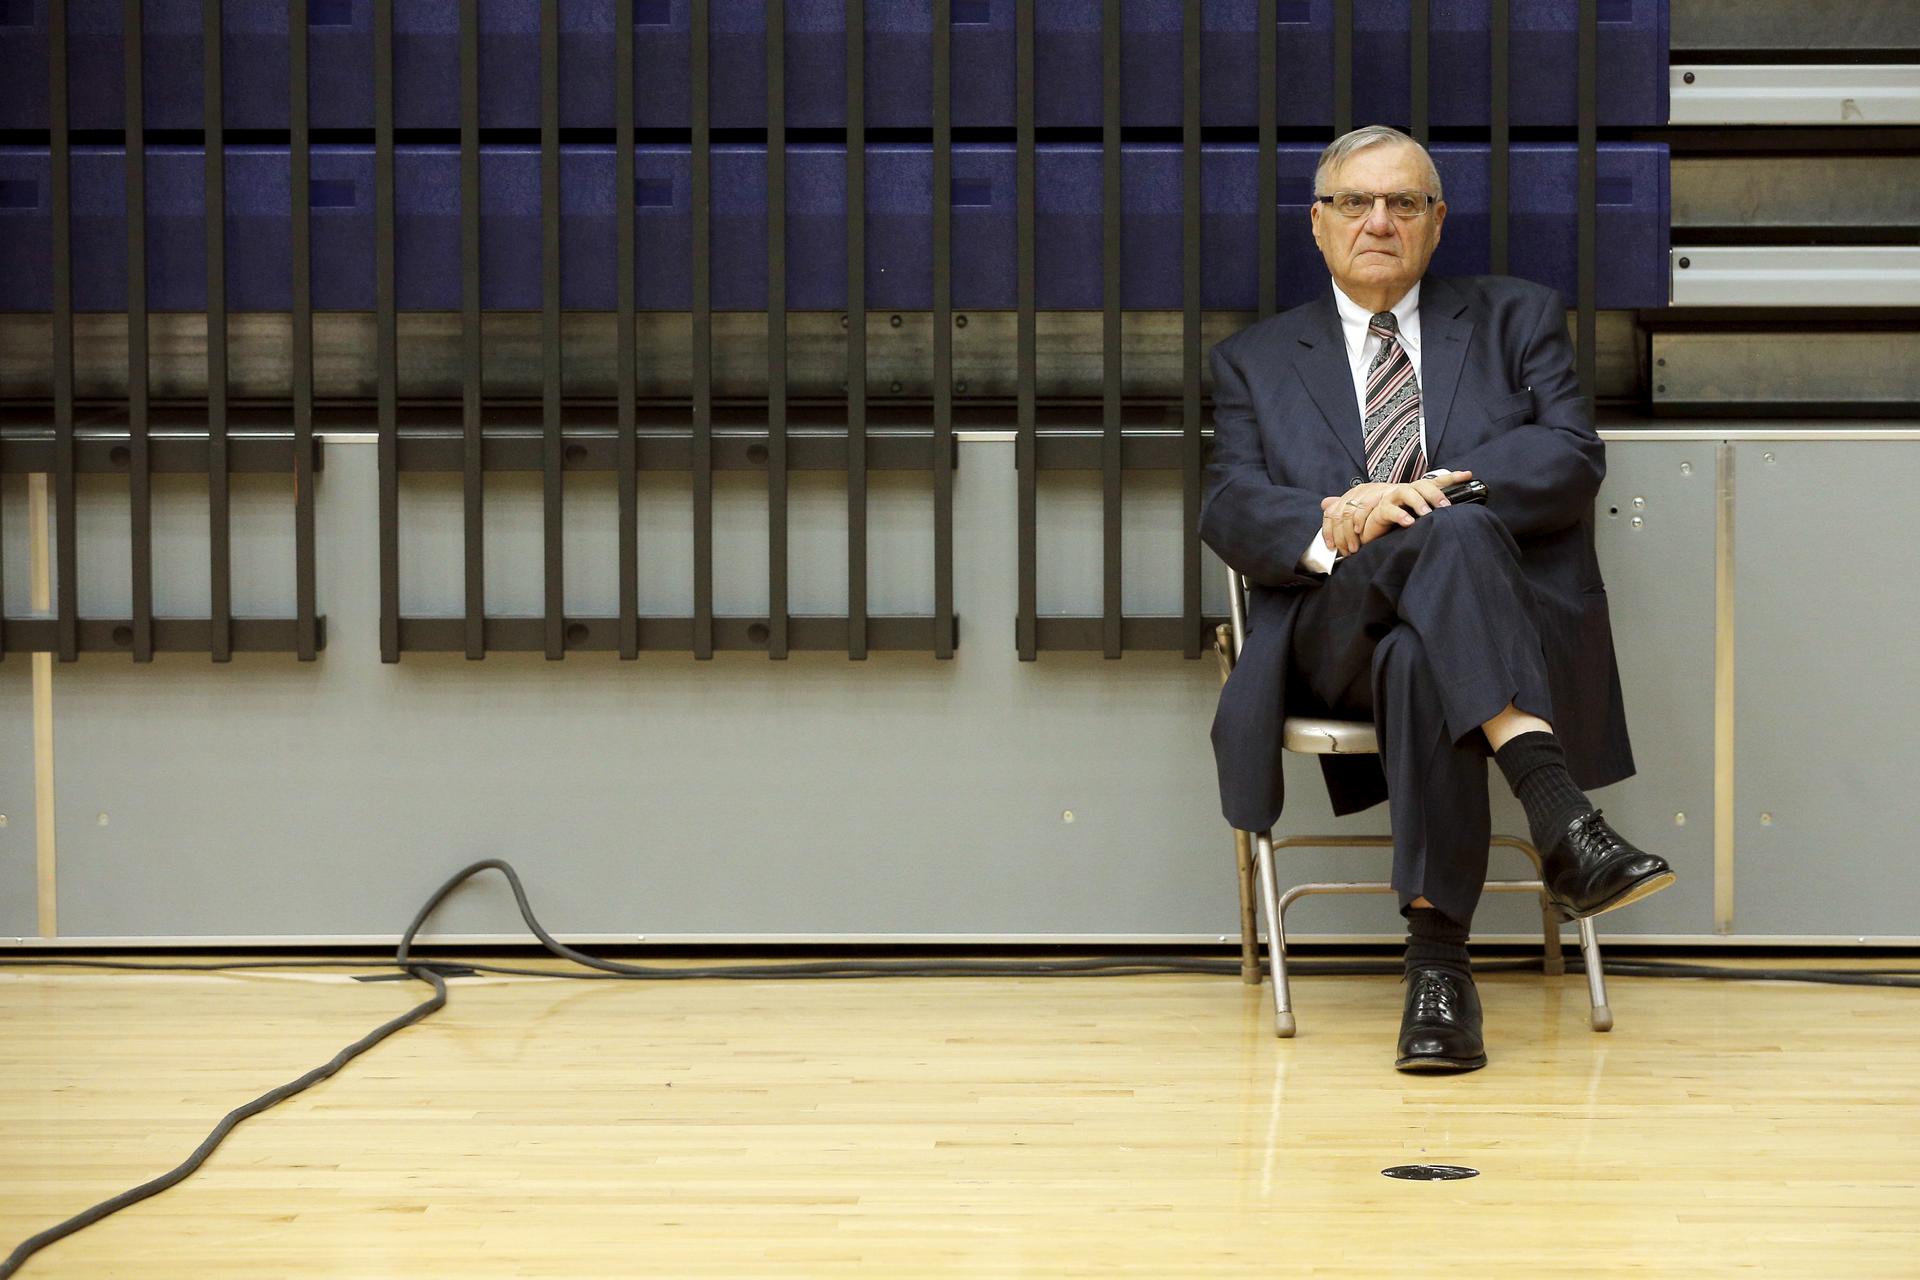 Arpaio sits on a folding chair in a gym